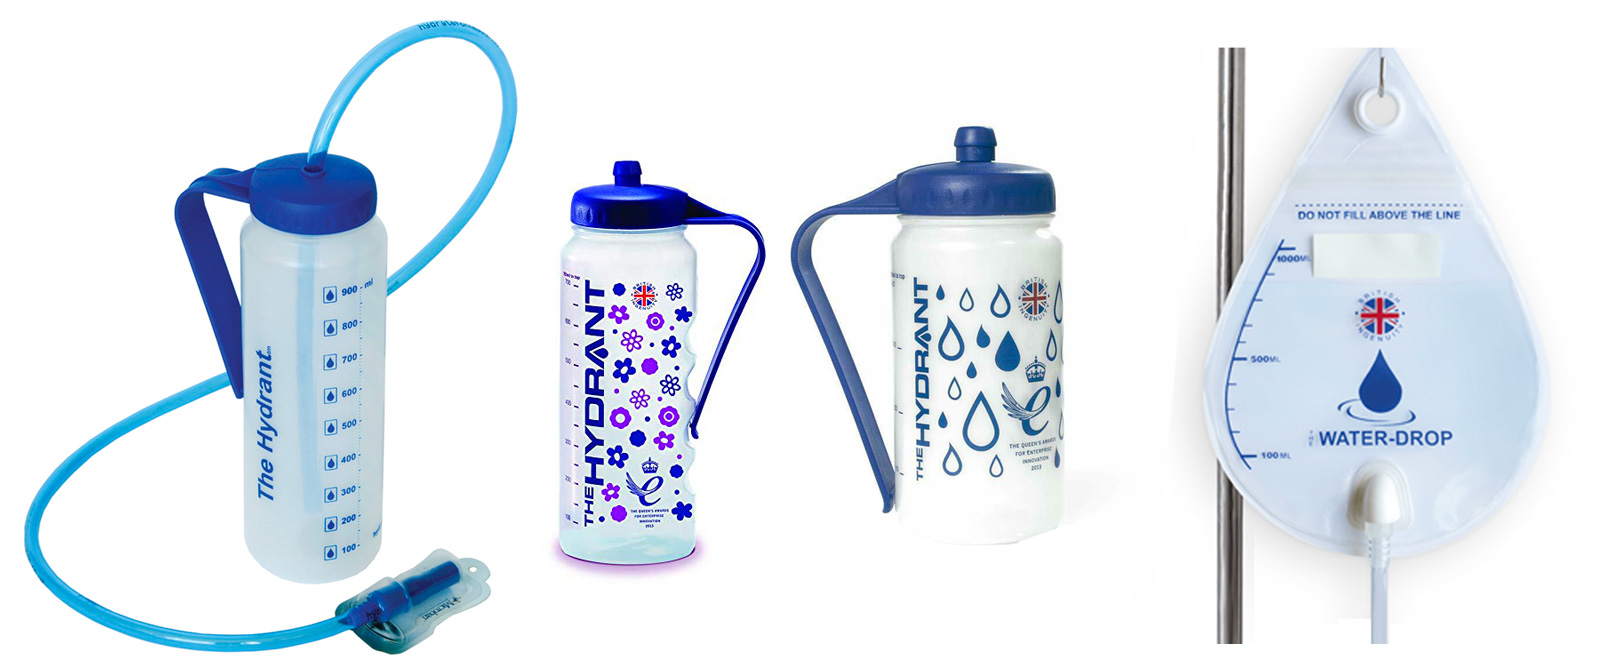 Image is a photograph of four types of Hydrate for Health drinks aids, including the Hydrant, the maternity Hydrant, the Sports Hydrant and the WaterDrop